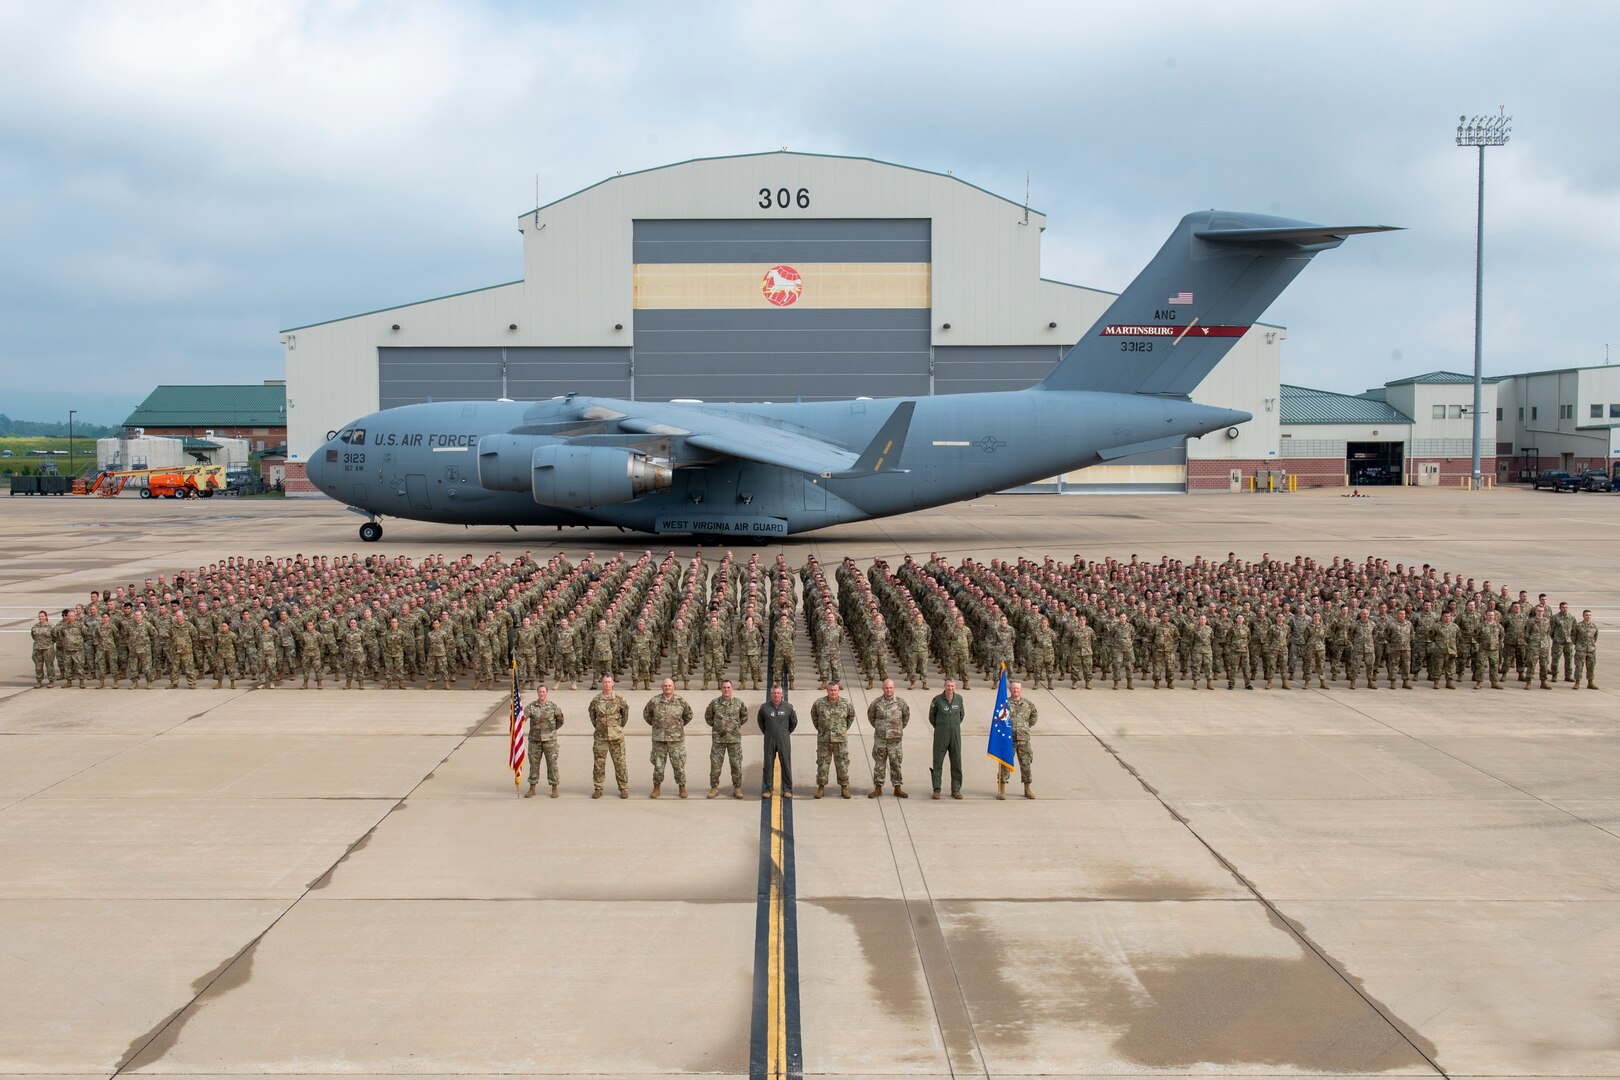 The Airmen of the 167th Airlift Wing stand in formation in front of one of the wing’s eight C-17 Globemaster III aircraft at Shepherd Field, Martinsburg W.Va., June 13, 2022. The photo concluded an extended unit training assembly.